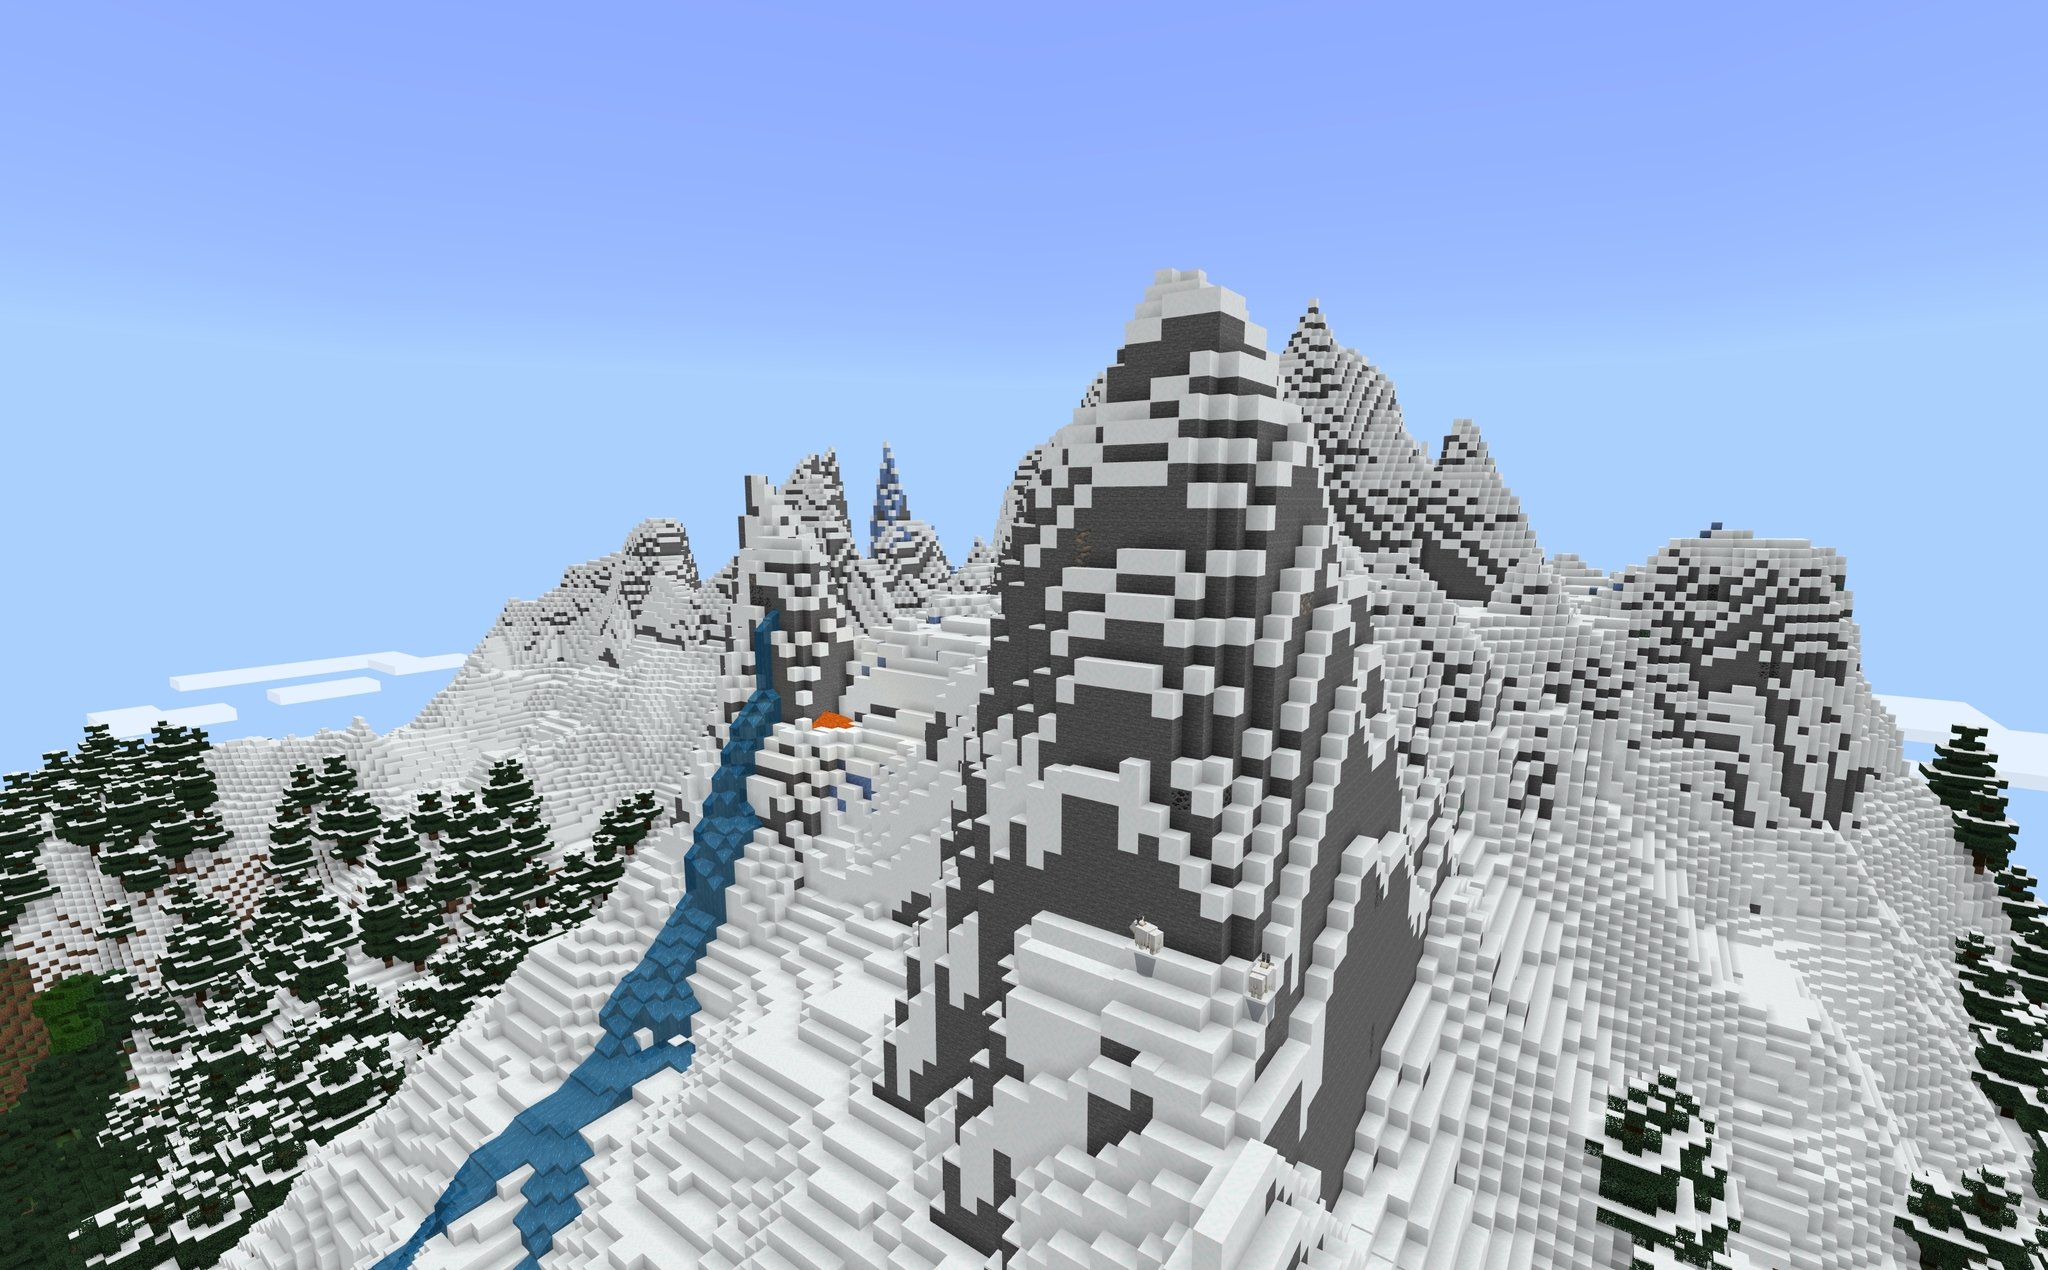 Minecraft Caves And Cliffs Update Mountain Generation